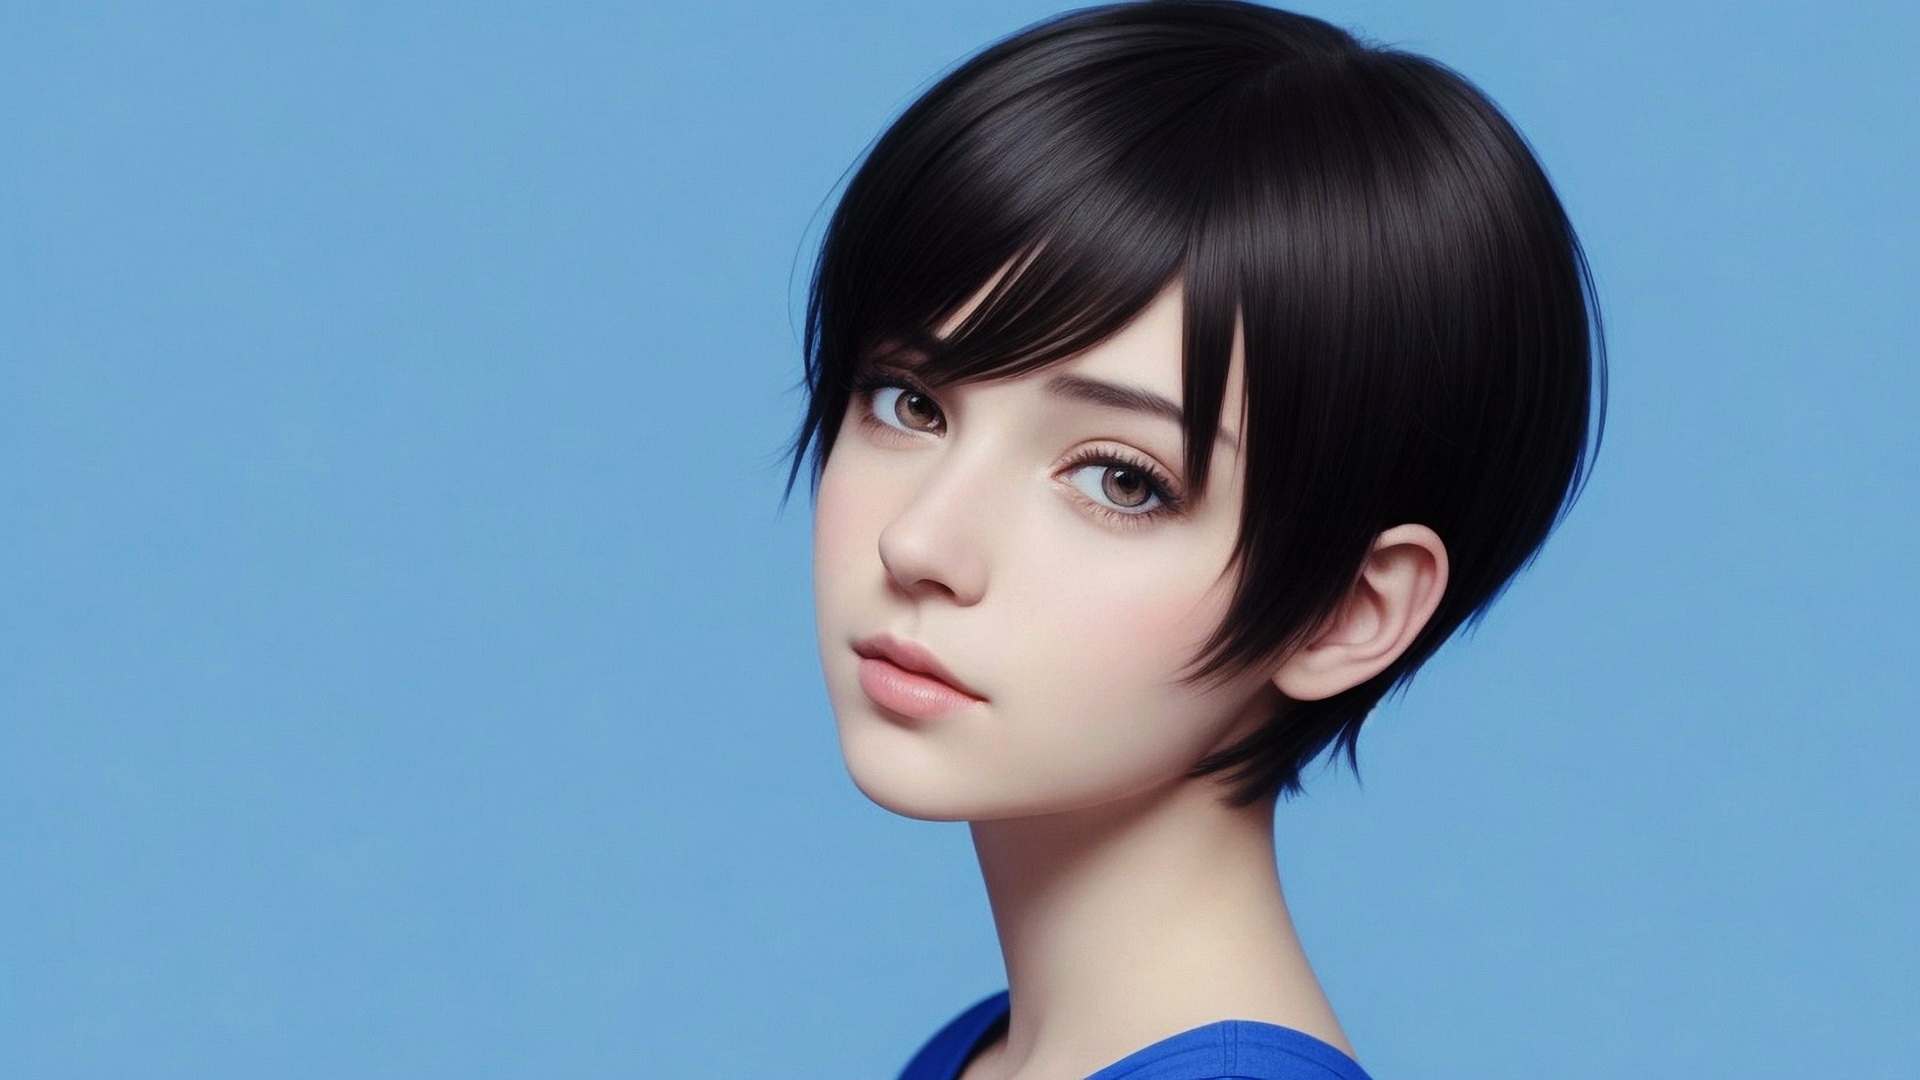 Portrait of a girl with short hair on a blue background